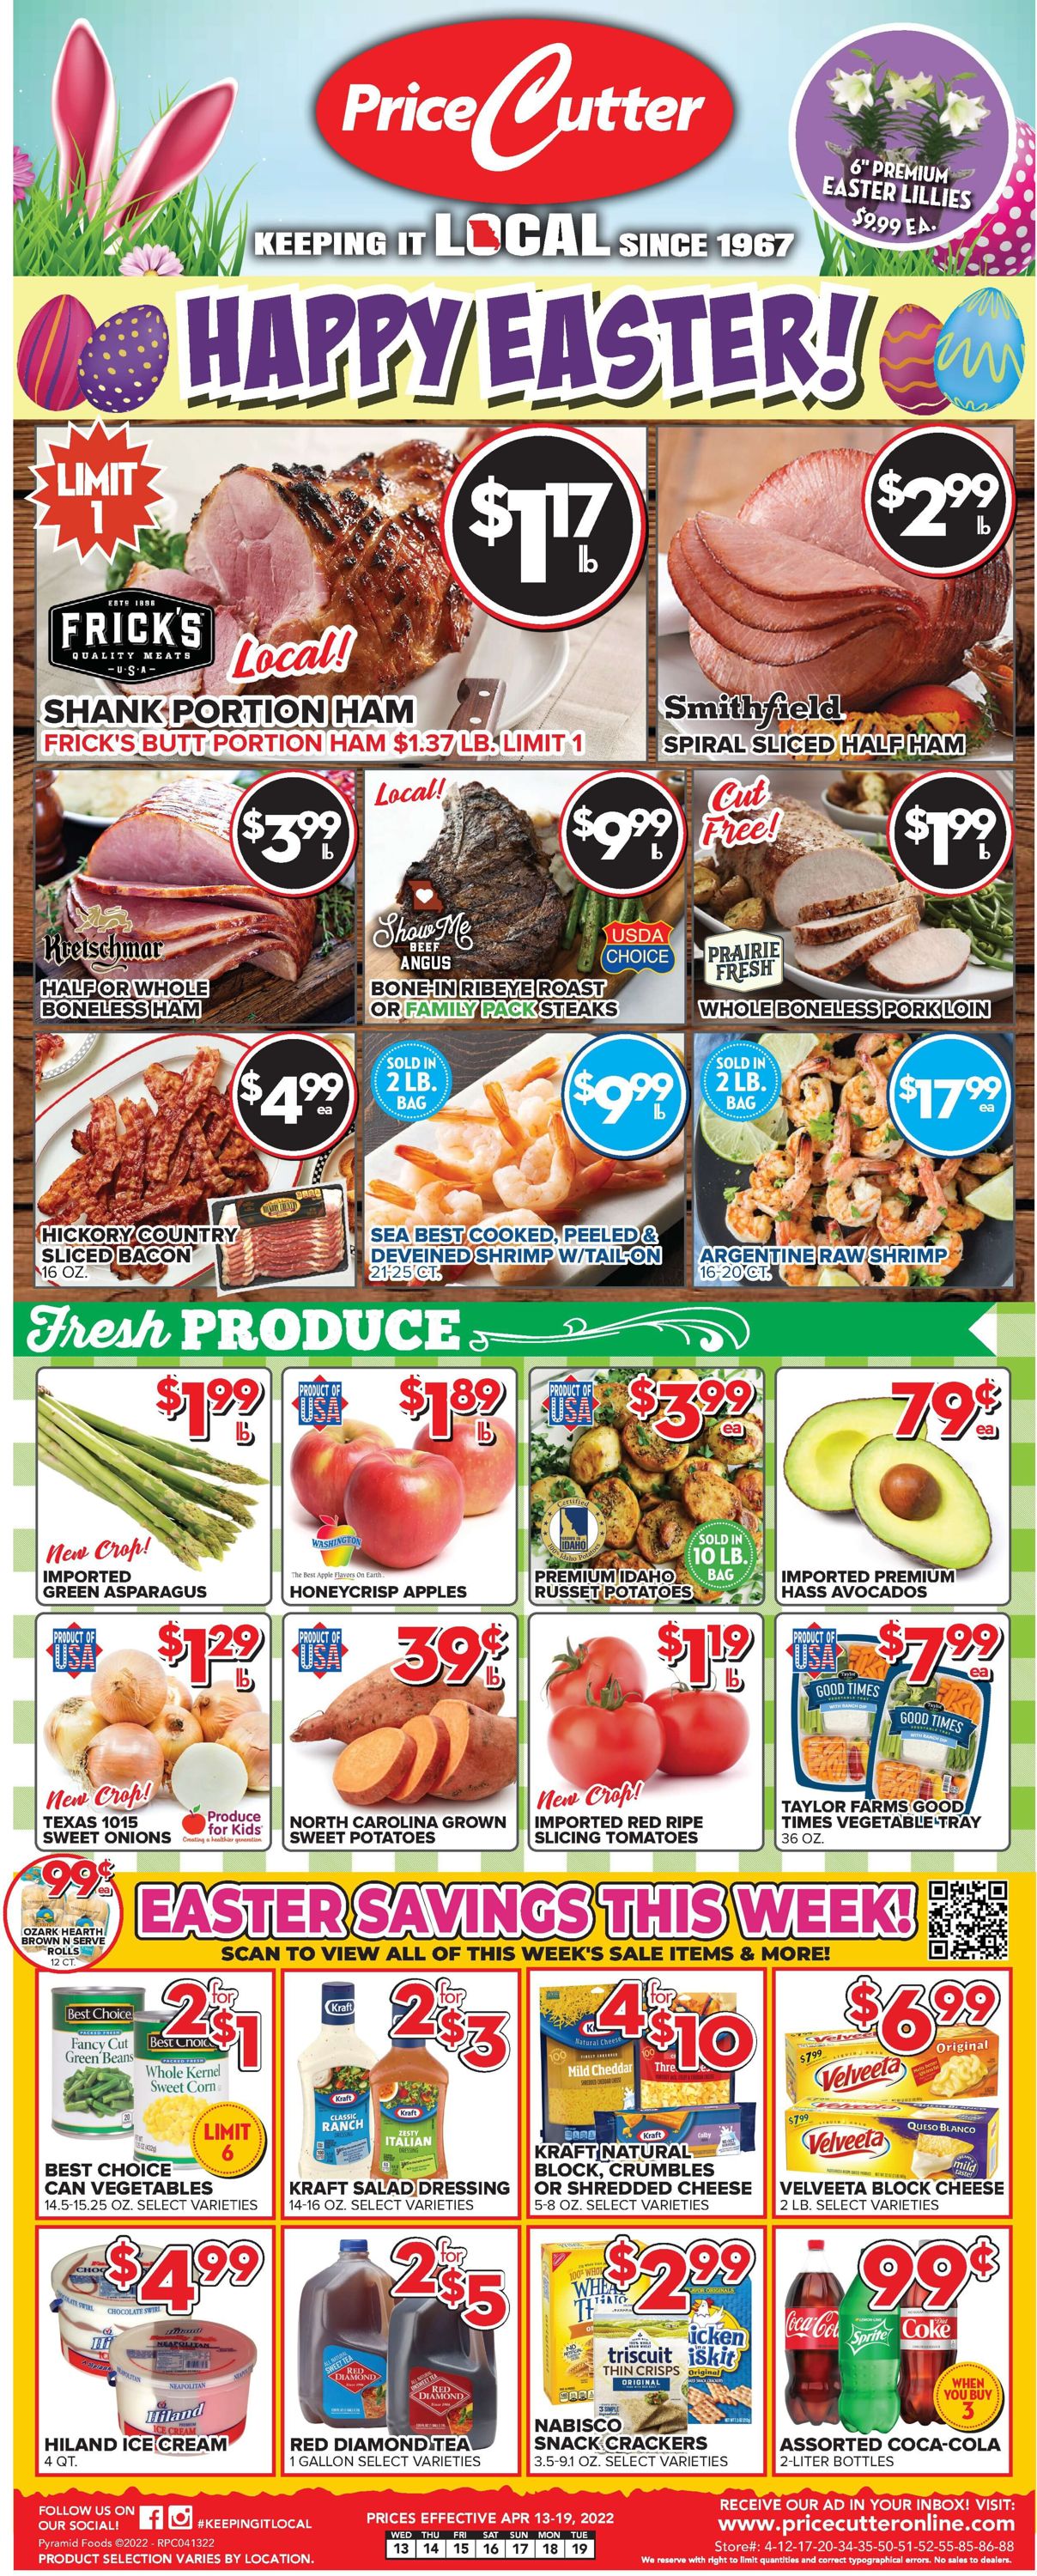 Price Cutter EASTER 2022 Weekly Ad Circular - valid 04/13-04/19/2022